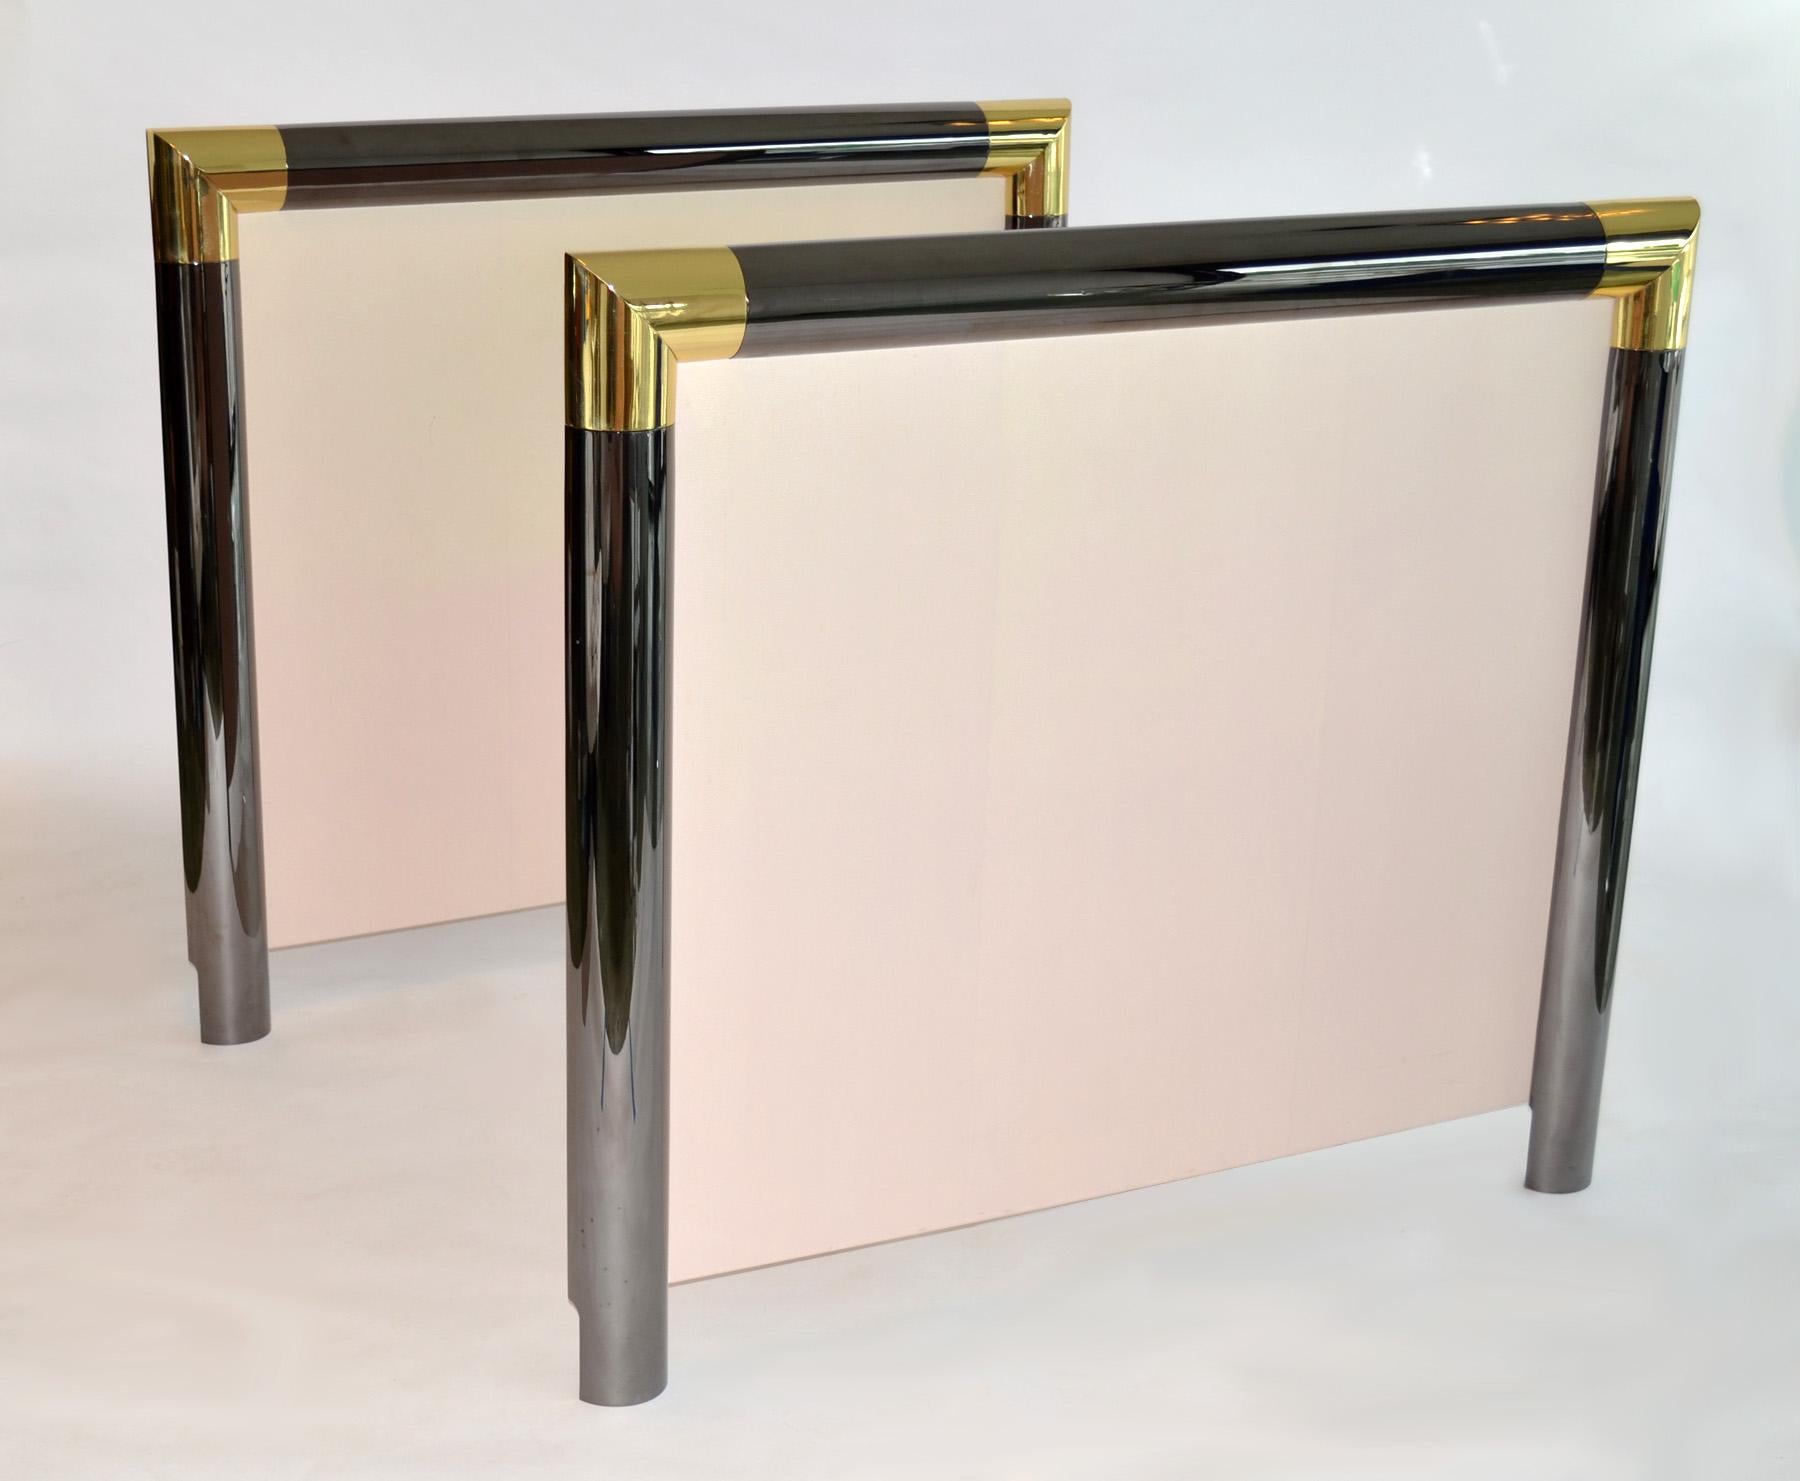 Pair of Signed Steel Brass Headboards by Karl Springer 1980s

Presenting an extraordinary discovery from a lavish Palm Beach, Florida estate, we offer a breathtaking pair of custom-designed headboards hailing from the early 1980s. Crafted by the